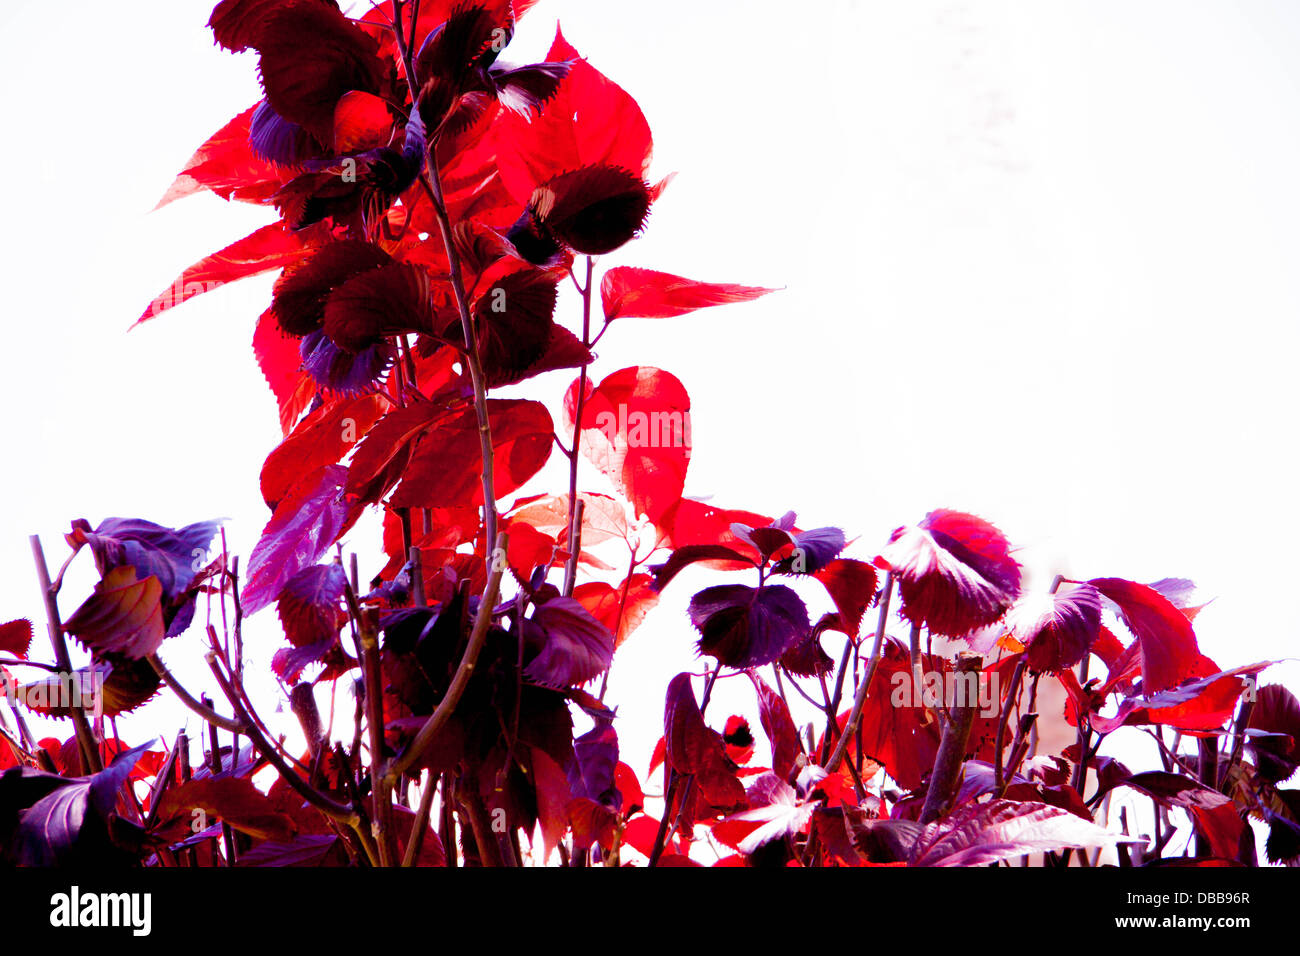 leaves.vibrant red. purple. white background Stock Photo